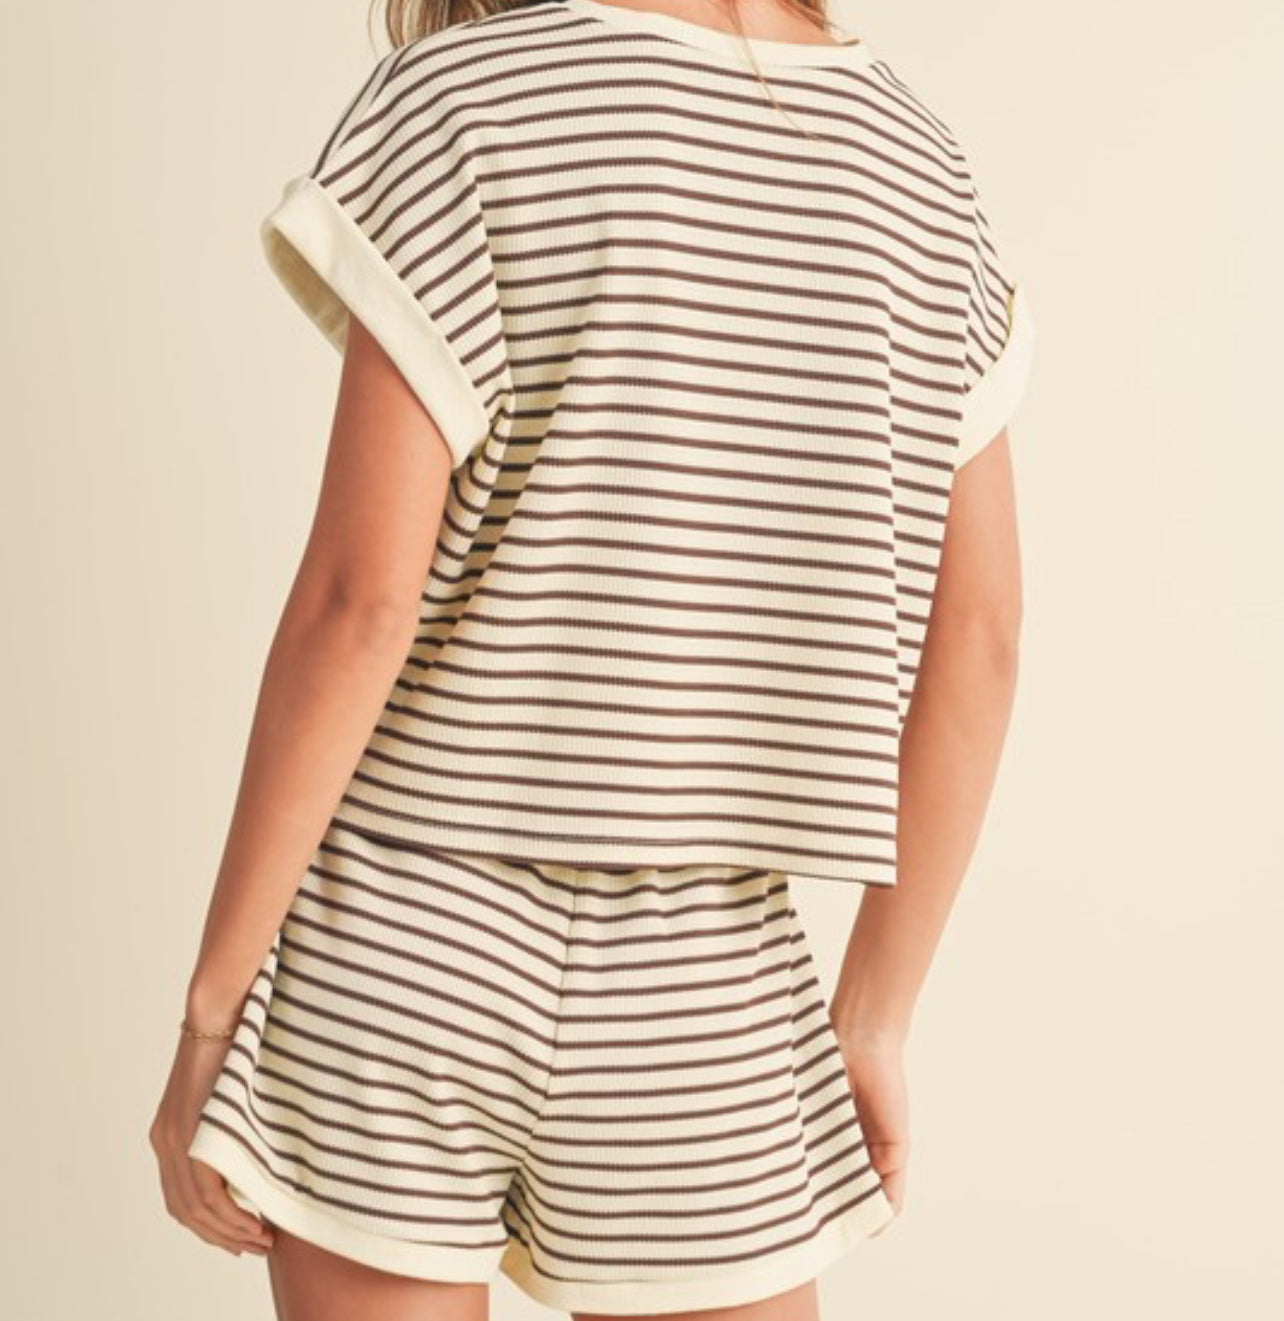 TEXTURED STRIPE PATTERN KNITTED TOP